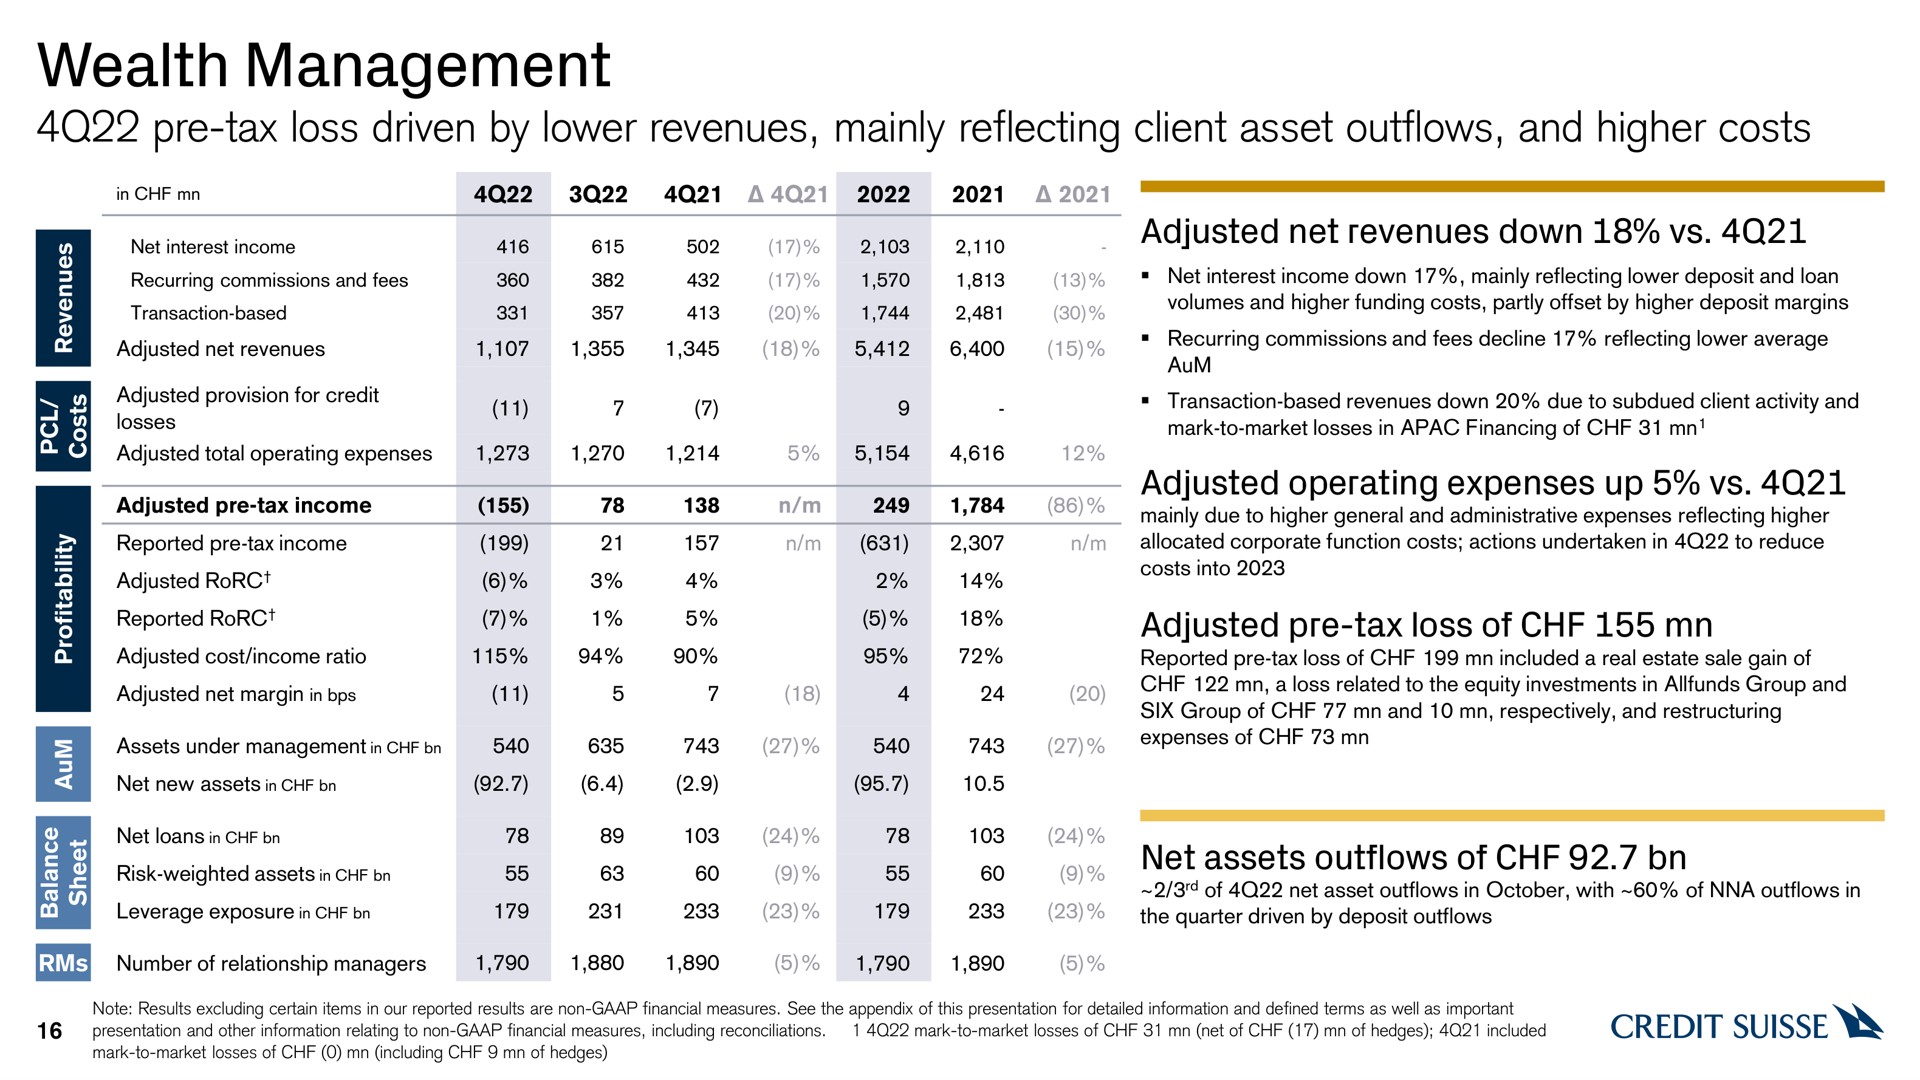 wealth management tax loss driven by lower revenues mainly reflecting client asset outflows and higher costs | Credit Suisse